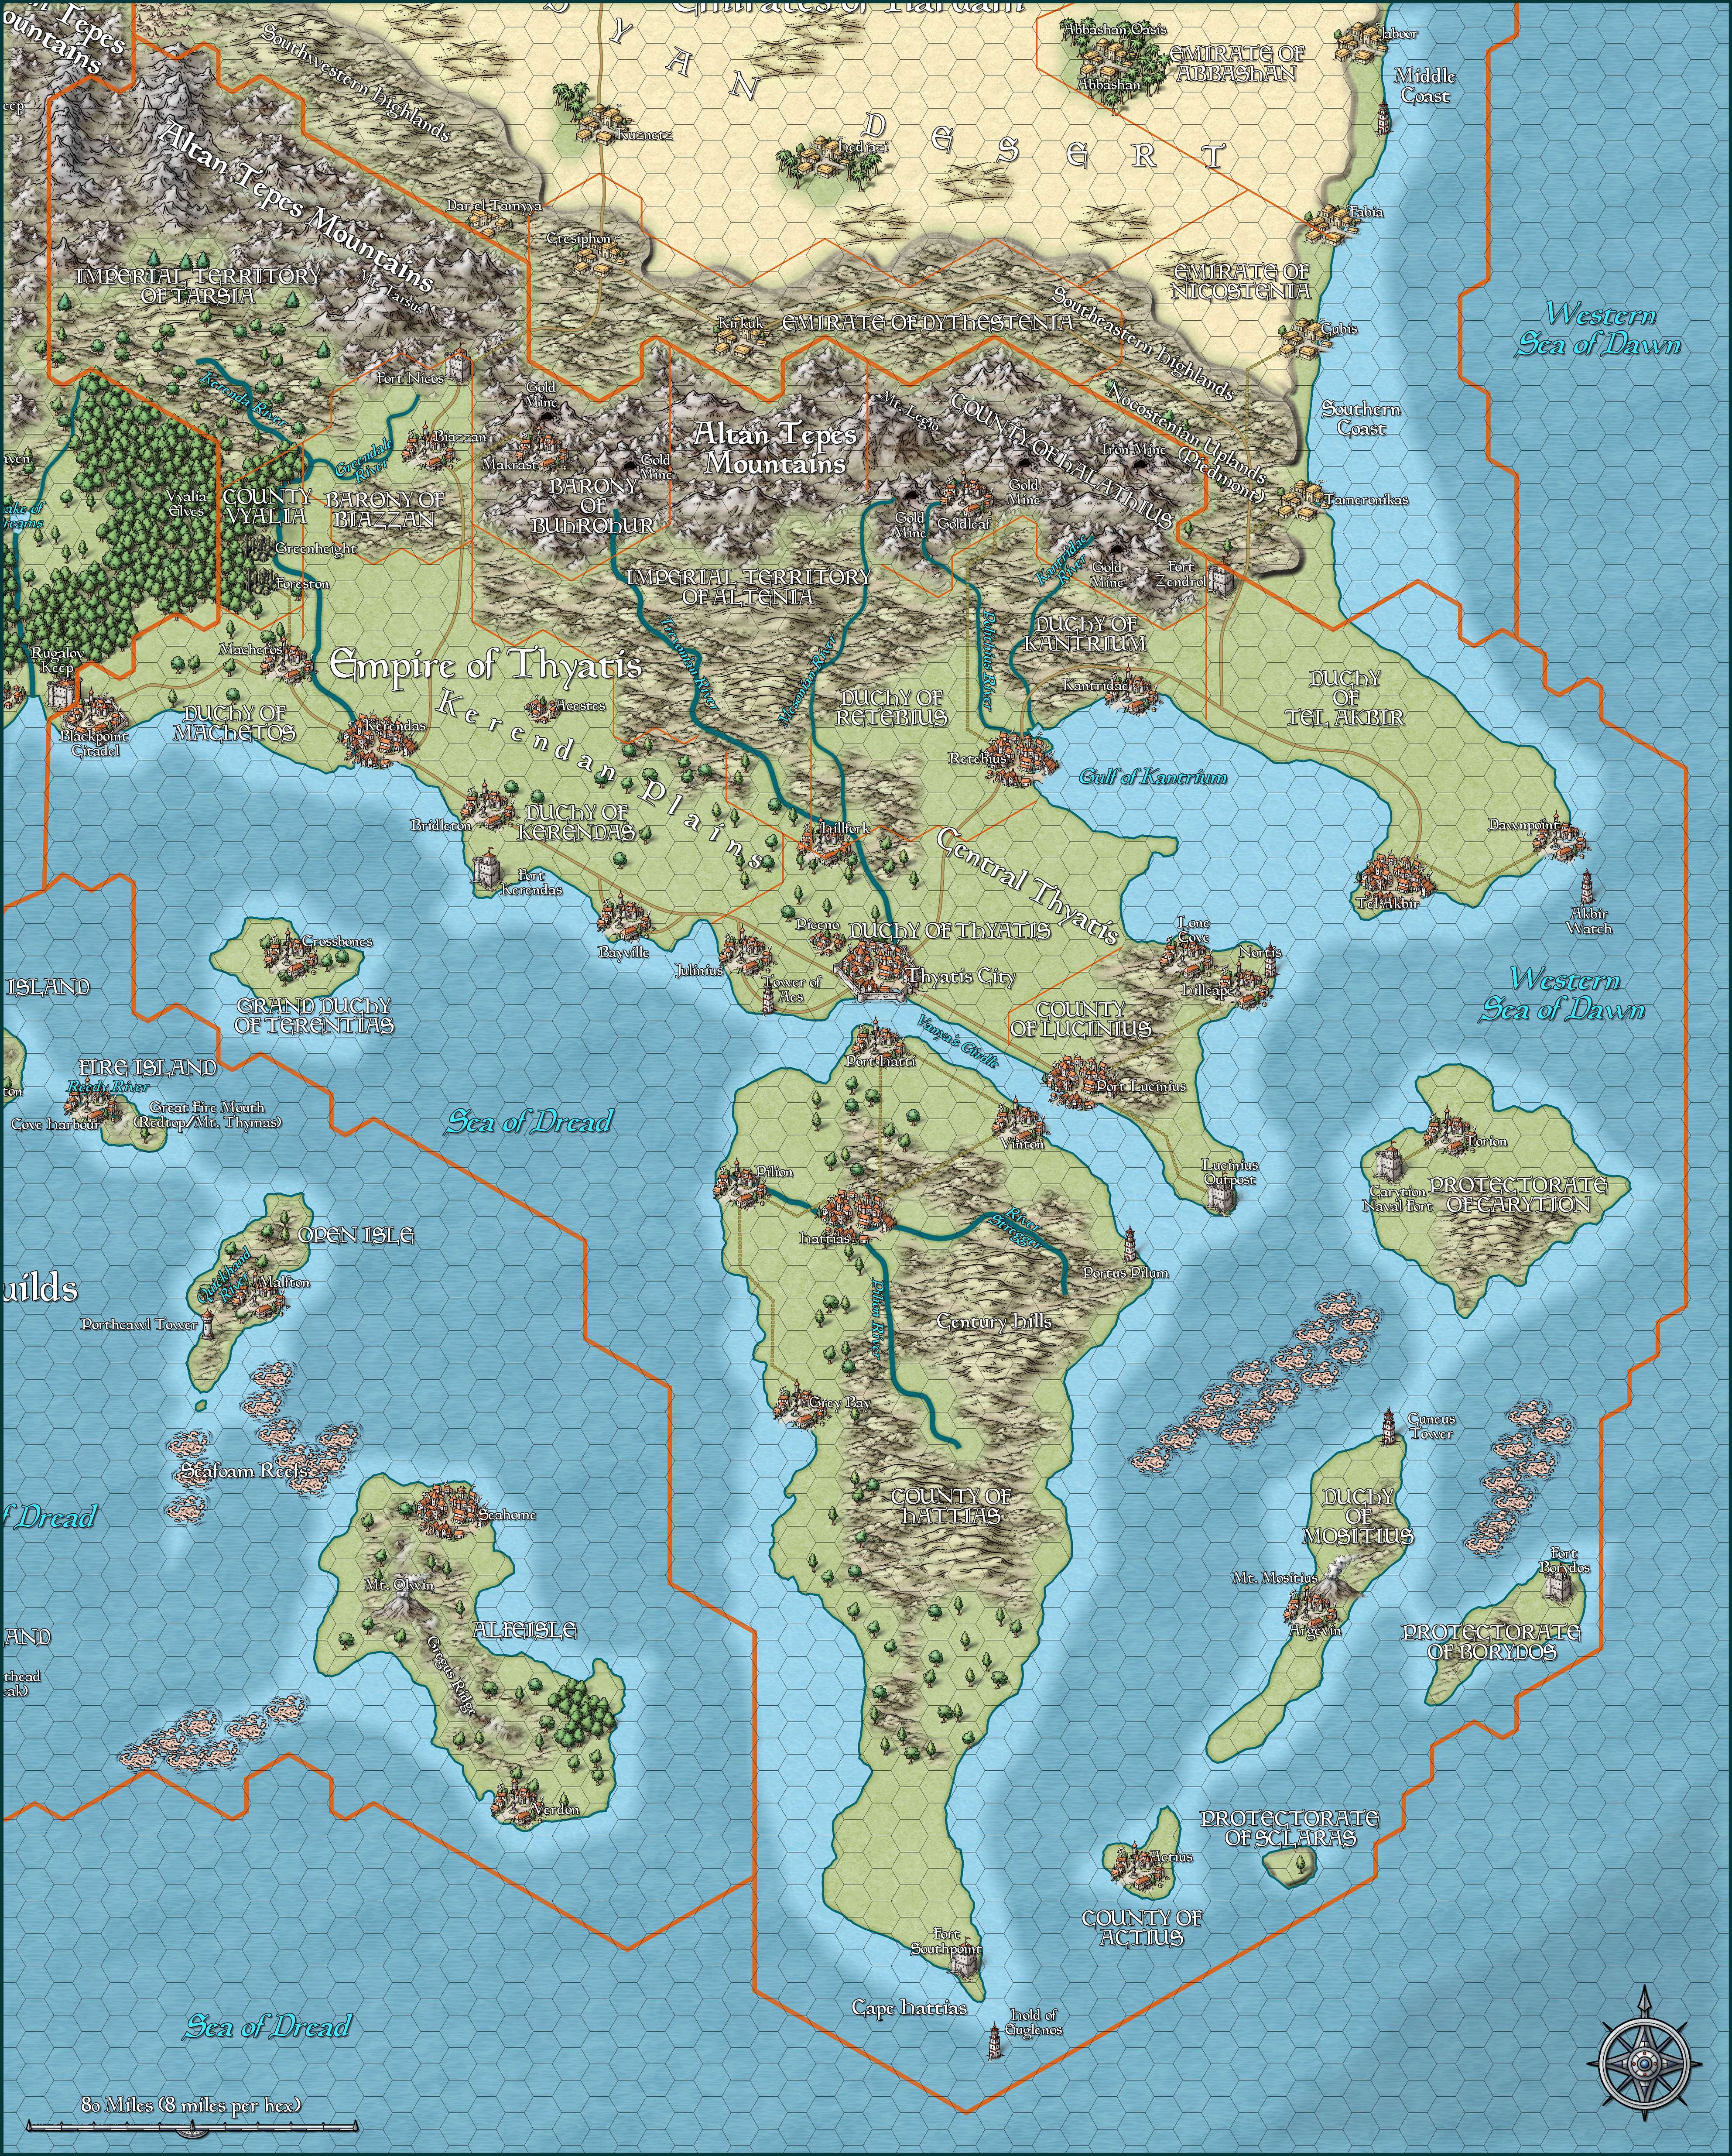 The Empire of Thyatis, 8 miles per hex by Jason Hibdon, May 2020